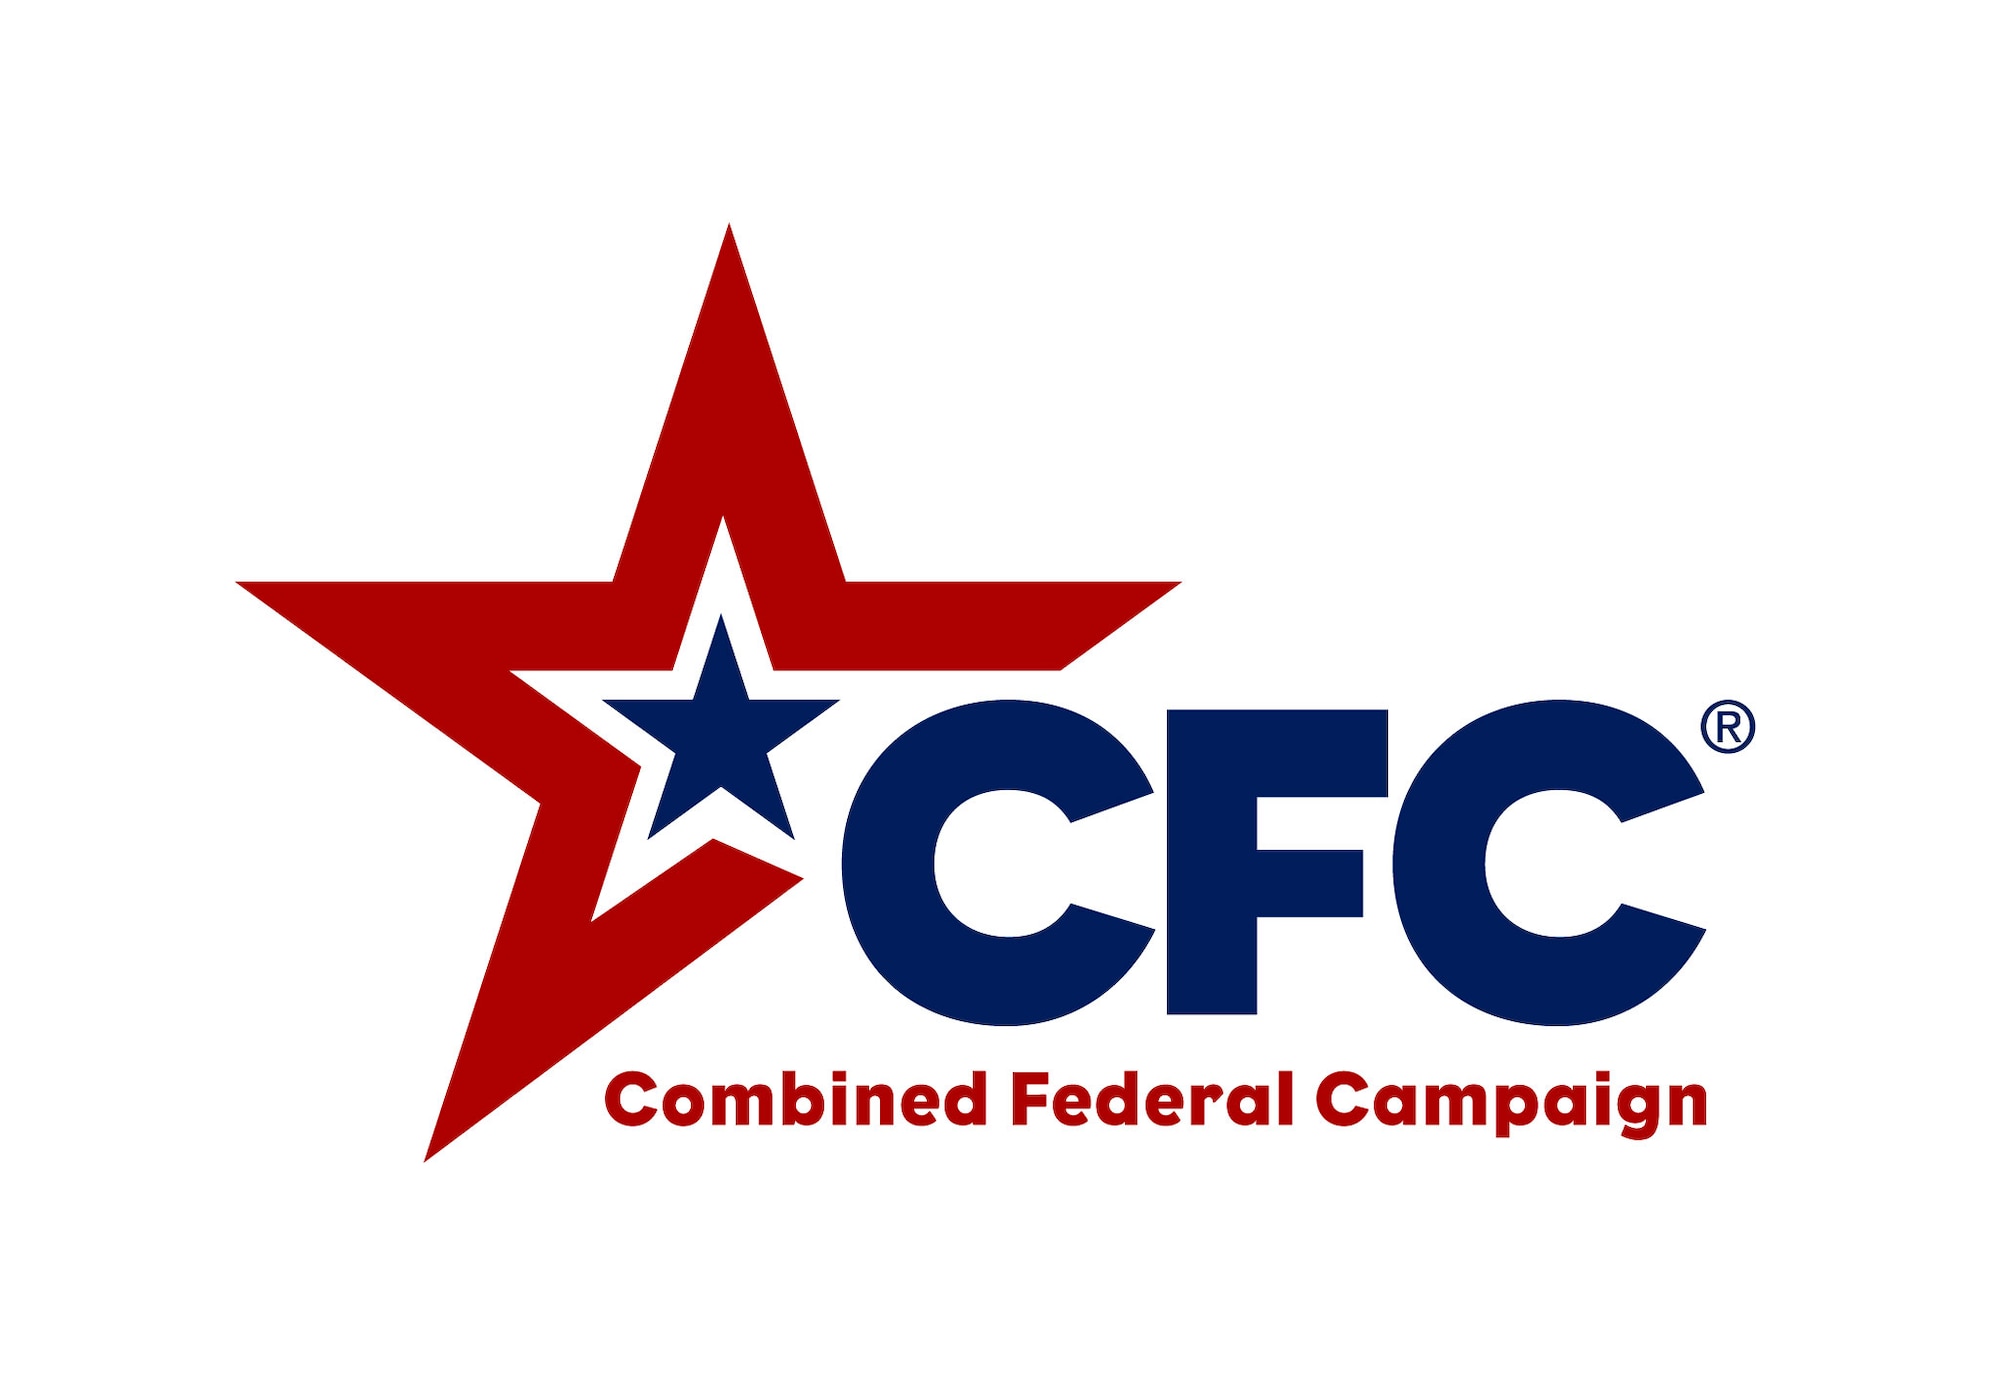 2018 Combined Federal Campaign